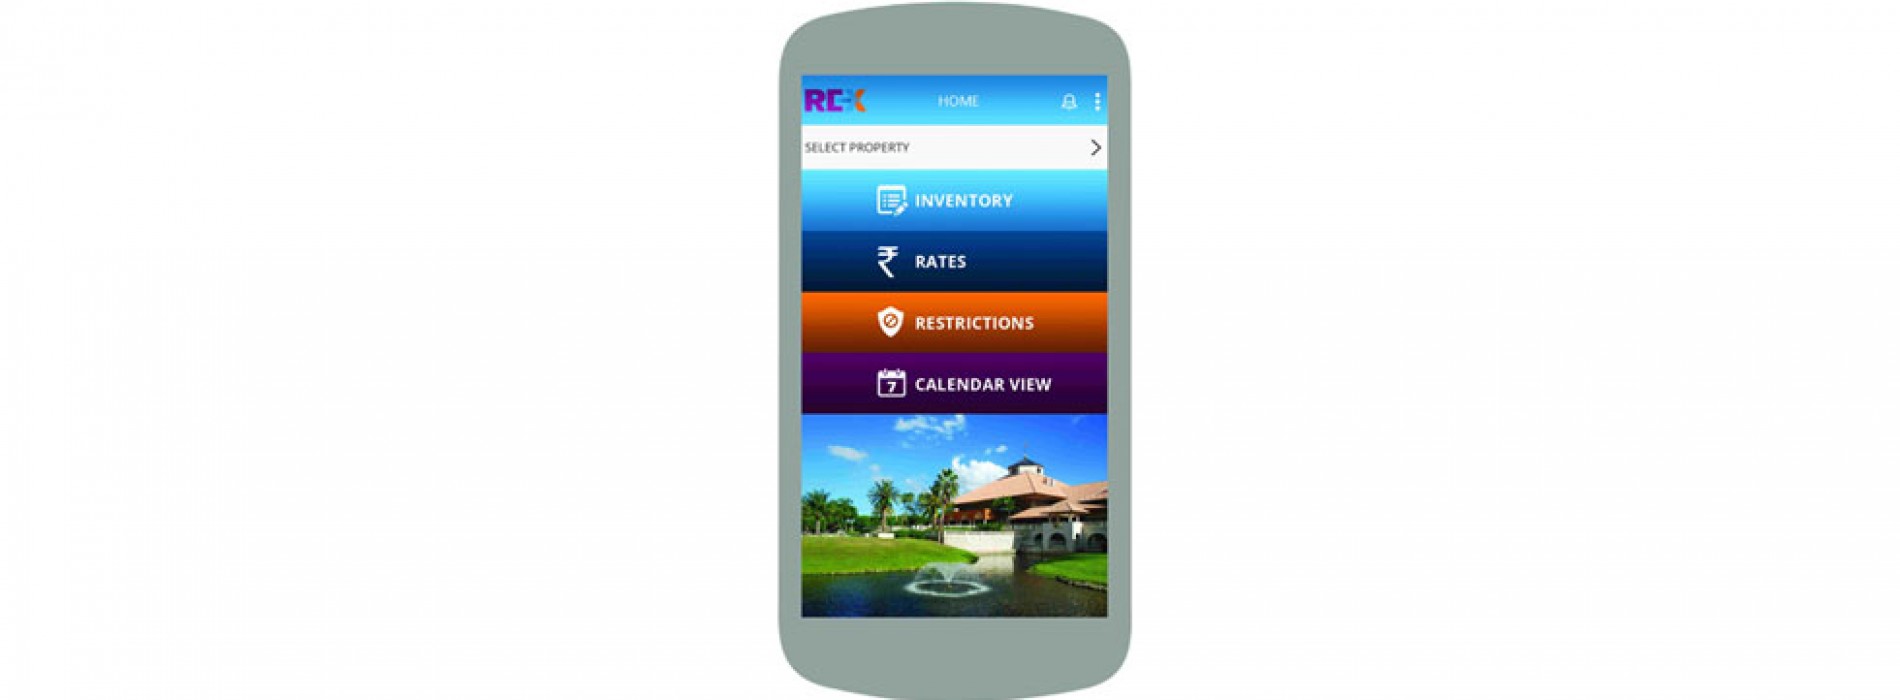 RezNext’s purpose-built mobile distribution application sees increased adoption by leading hoteliers